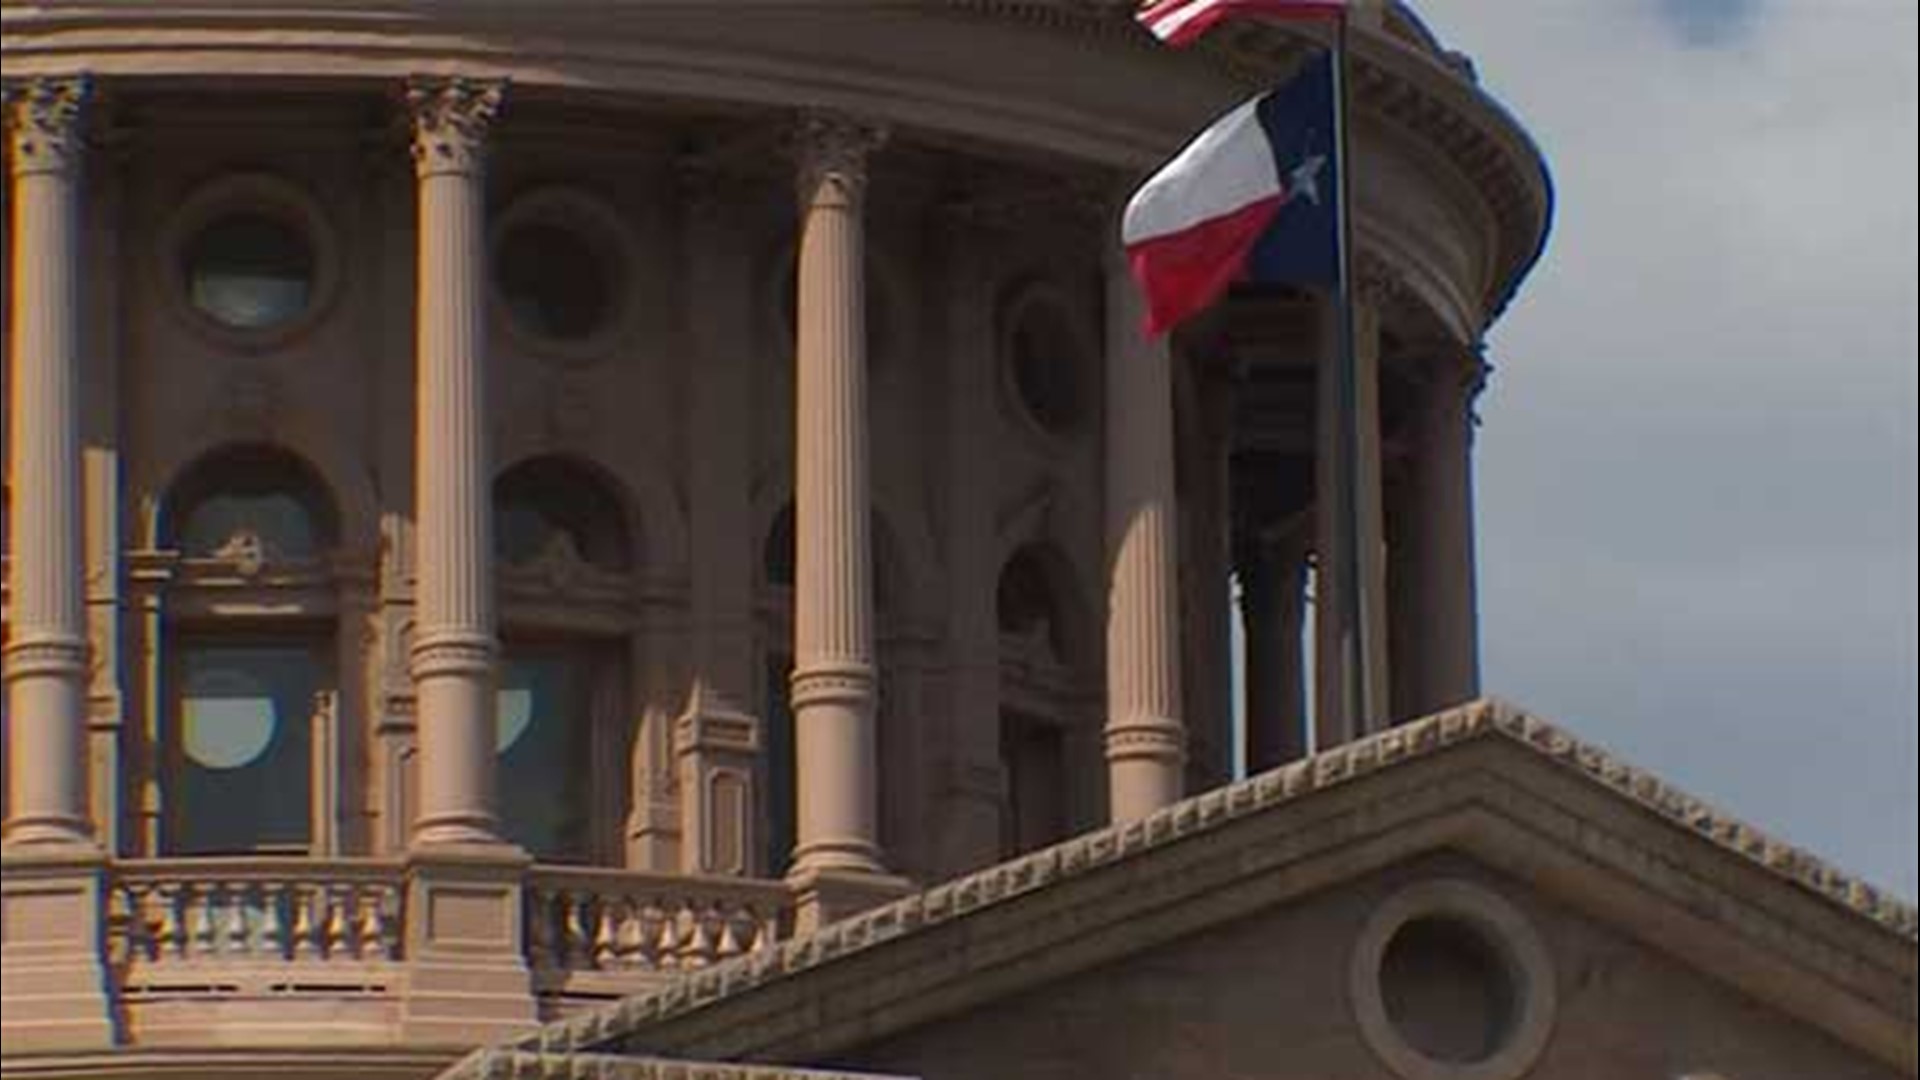 The poll says 56 percent of Texans think the state is not on a good track, up from 49 percent in 2021.